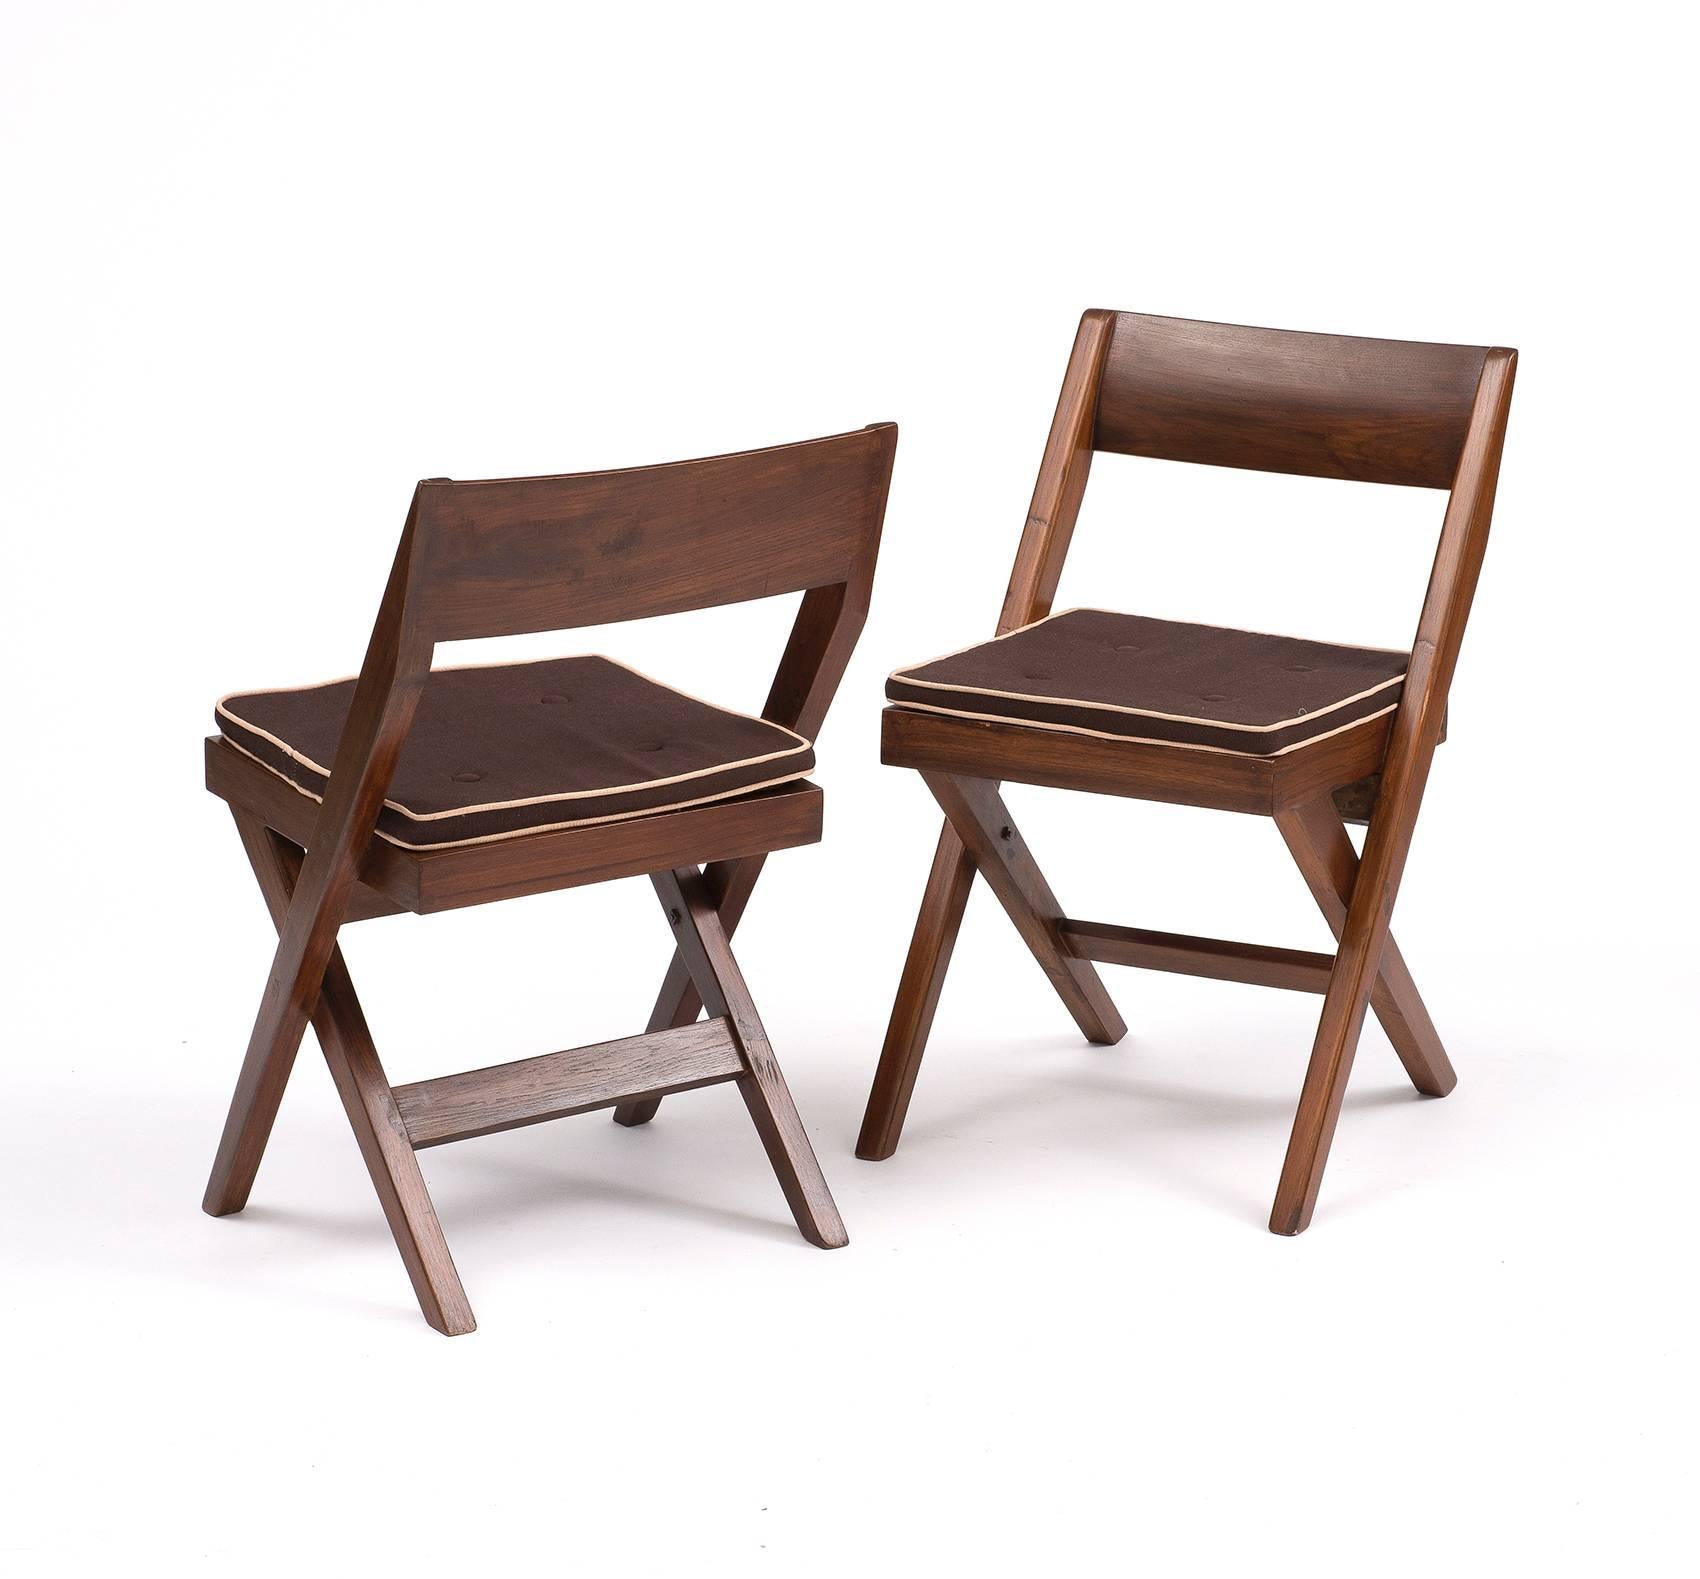 Indian Set of Six Pierre Jeanneret Library Chairs in Teak from Chandigarh, 1950s